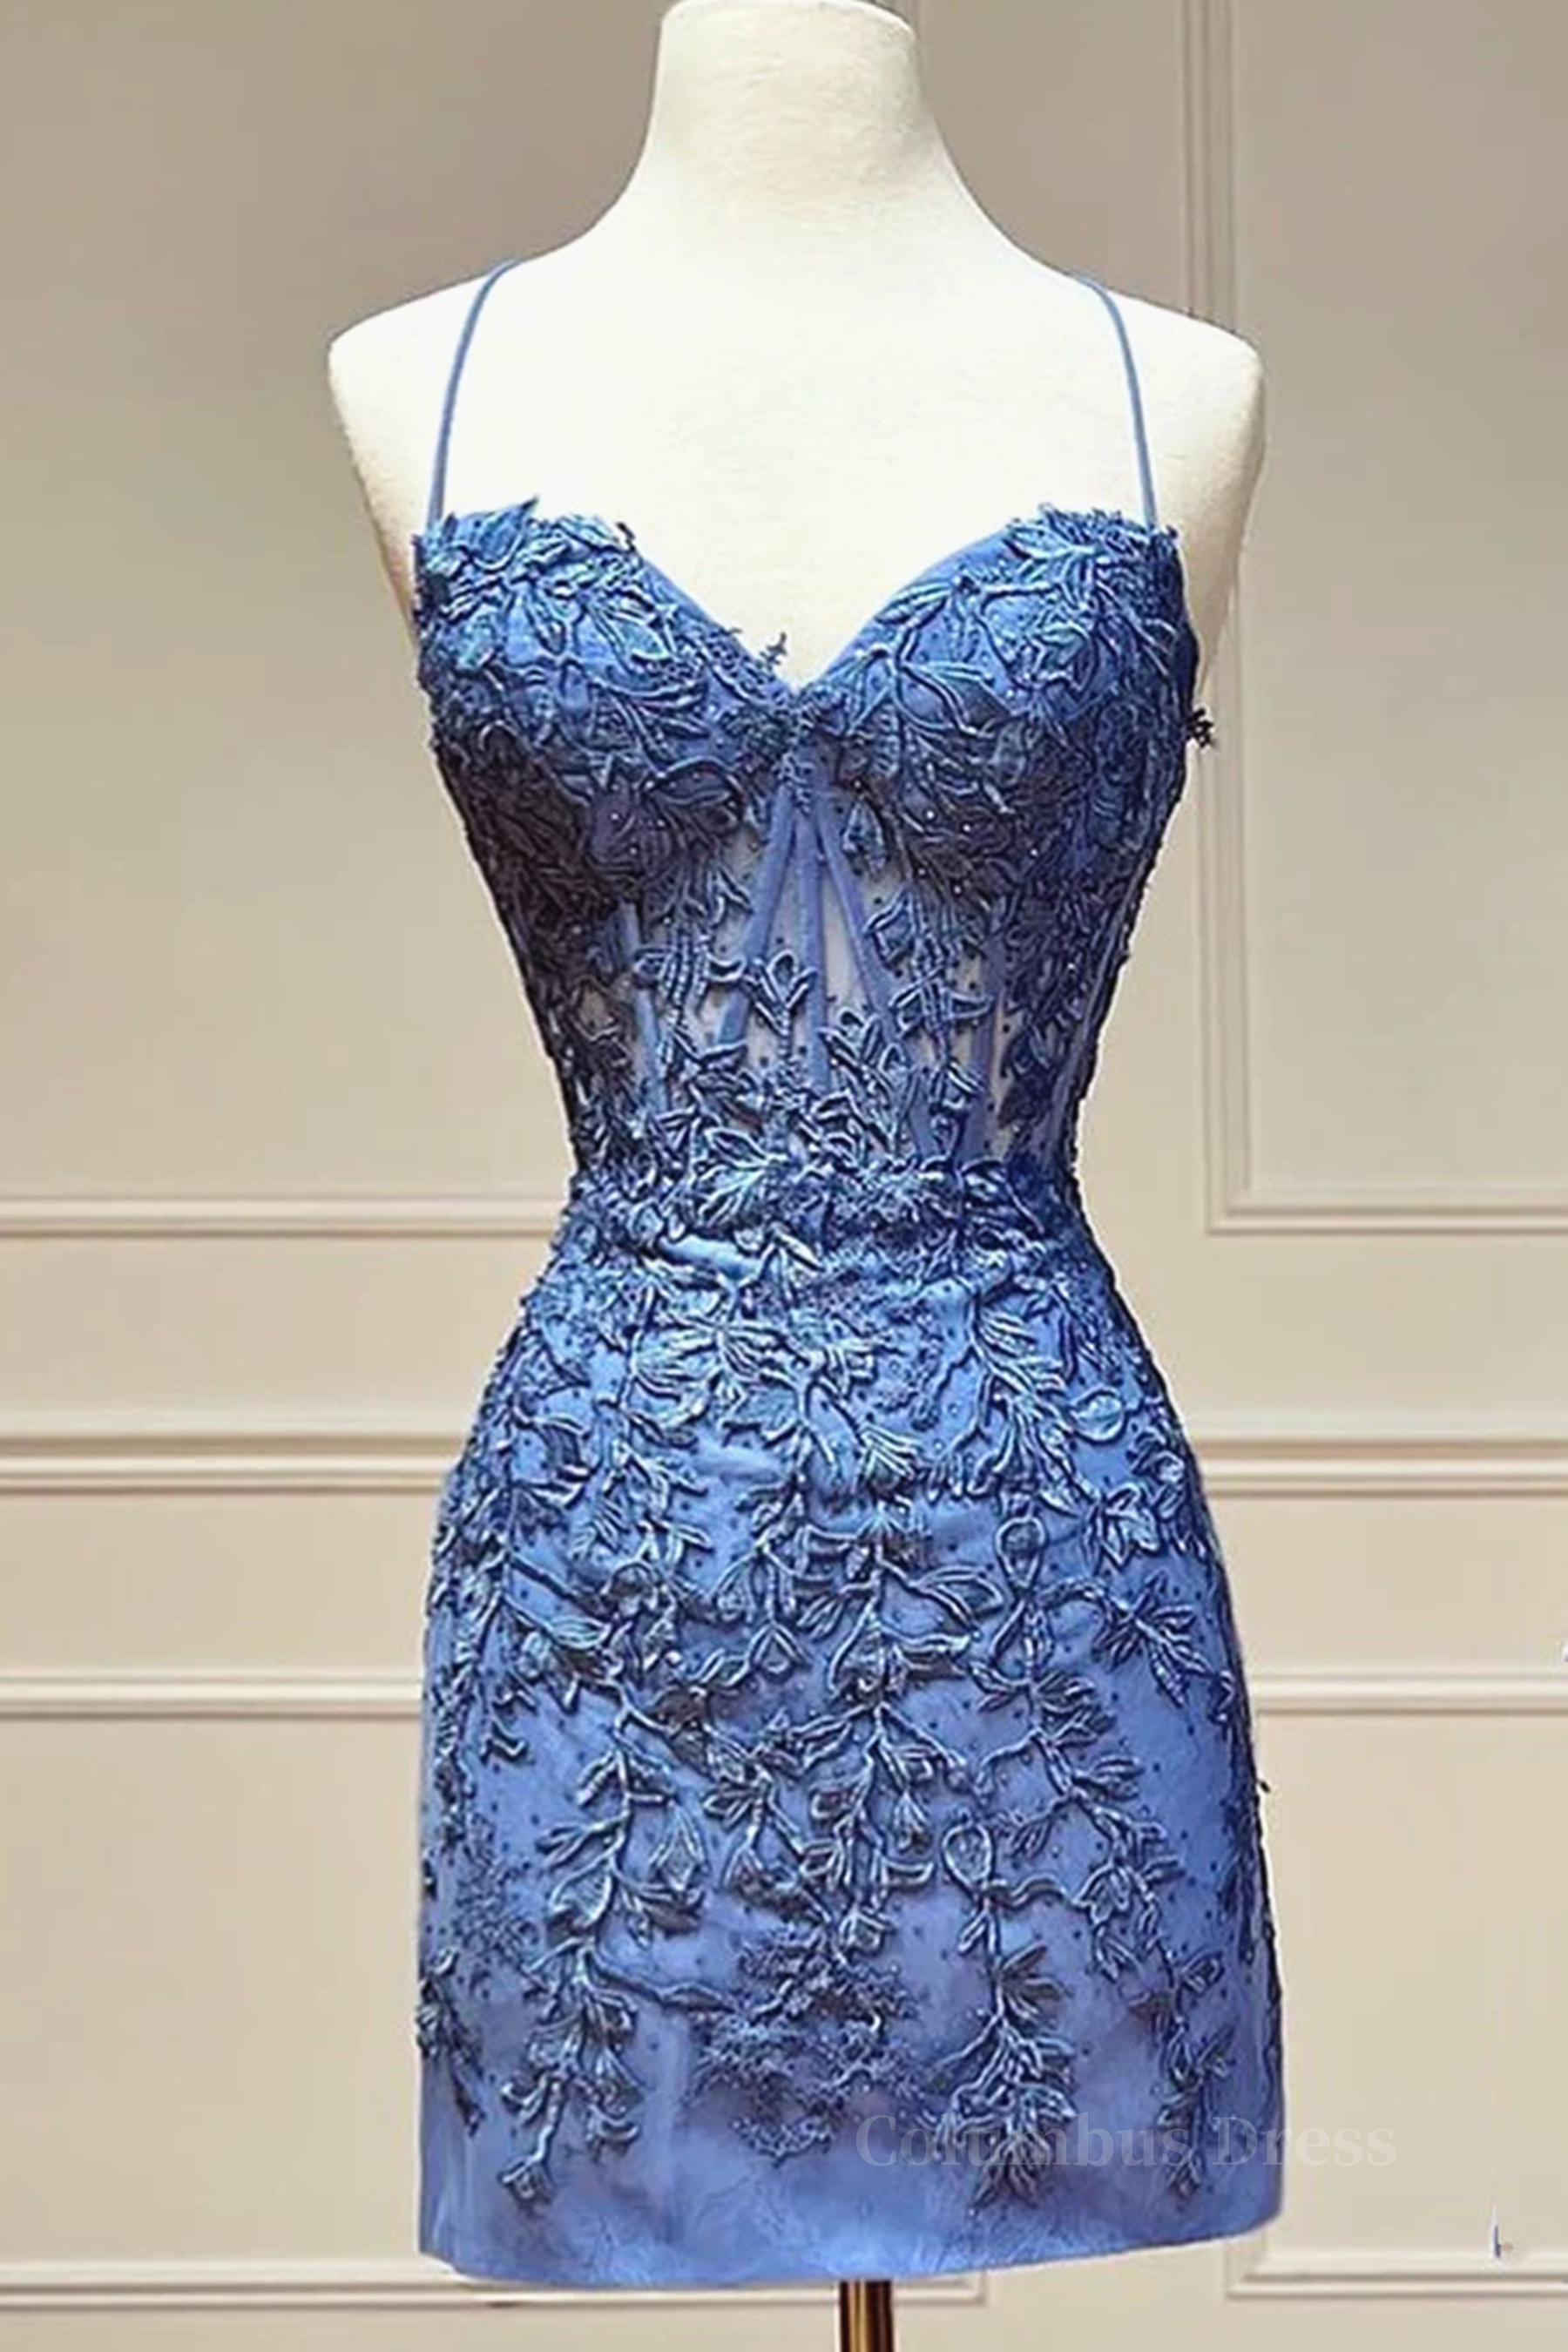 Sweetheart Neck Short Blue Lace Corset Prom Dresses, Short Blue Lace Corset Formal Corset Homecoming Dresses outfit, Evening Dresses Stores